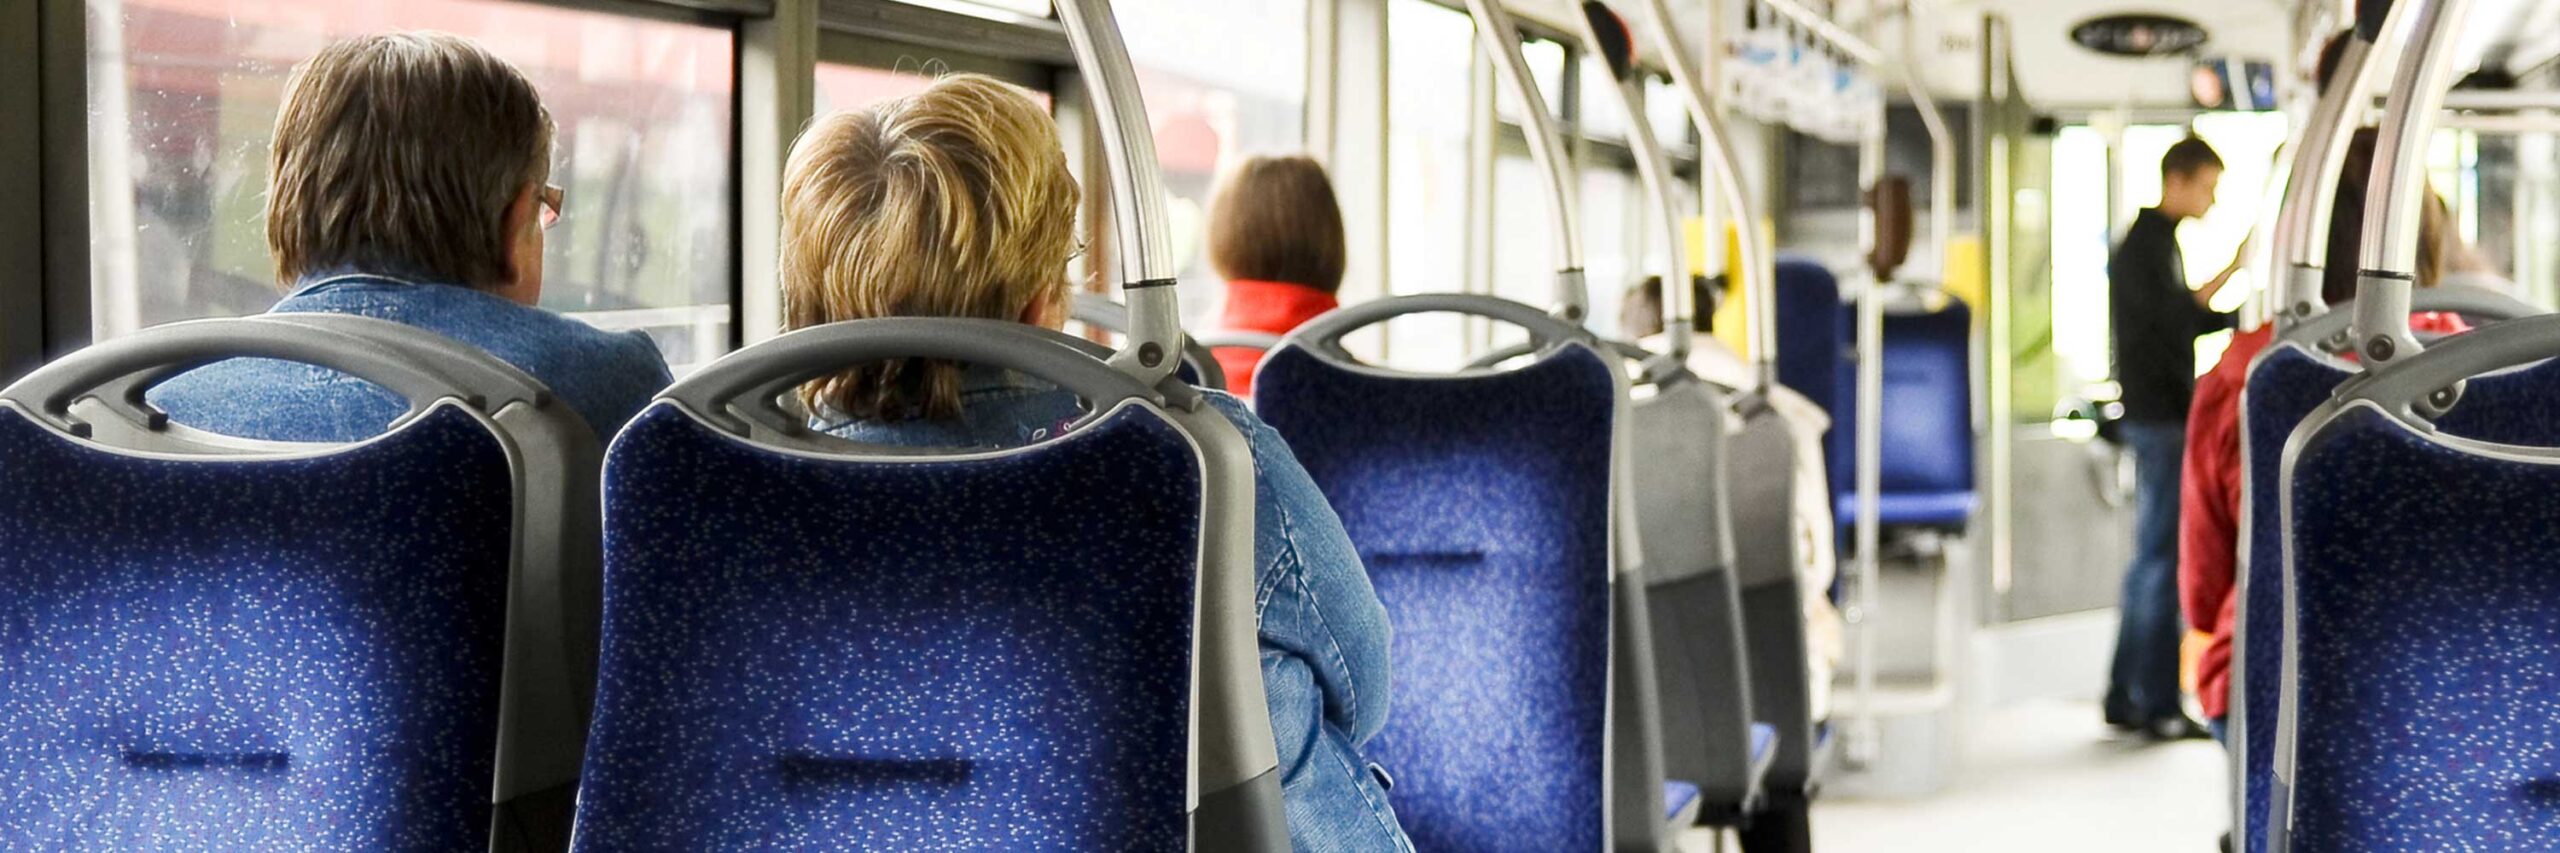 People seating on a bus